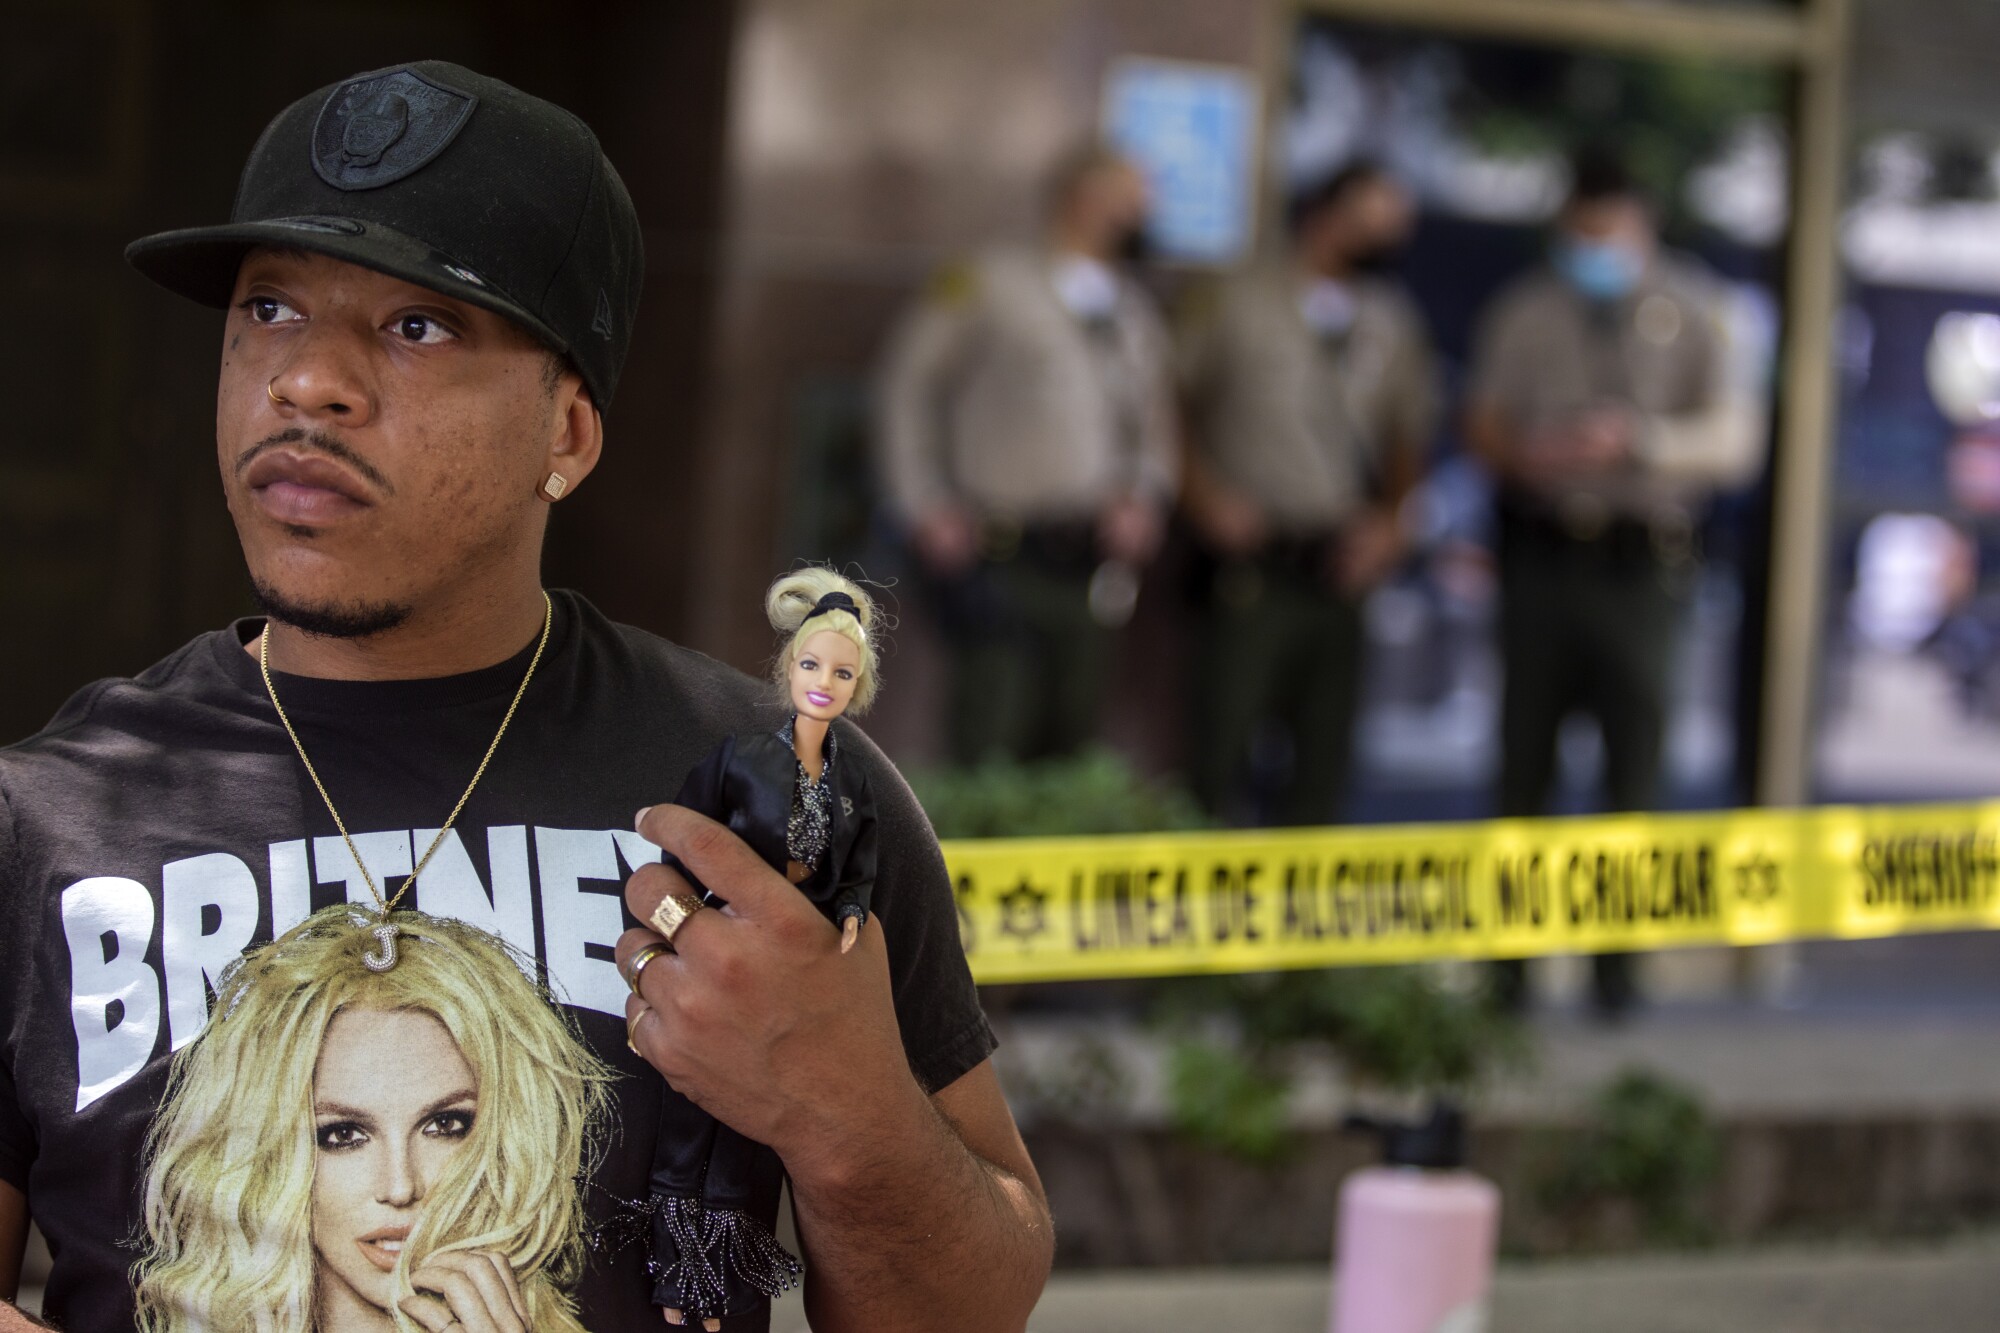 Derrick Daniels, 32, of Las Vegas holds a Britney Spears doll outside an L.A. courthouse .